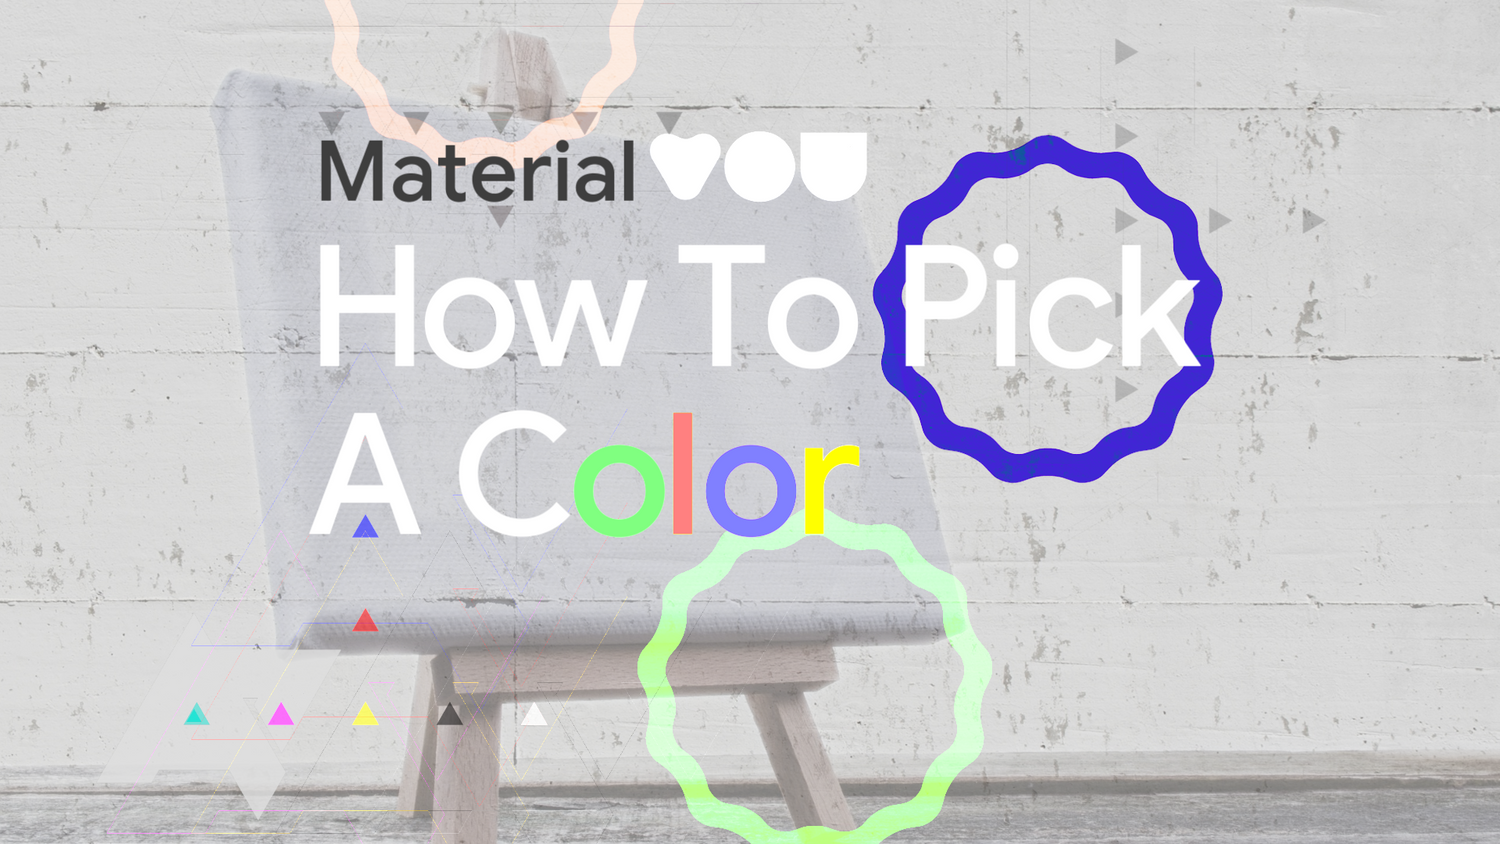 material you how to pick a color.png?q=50&fit=contain&w=1500&h=&dpr=1